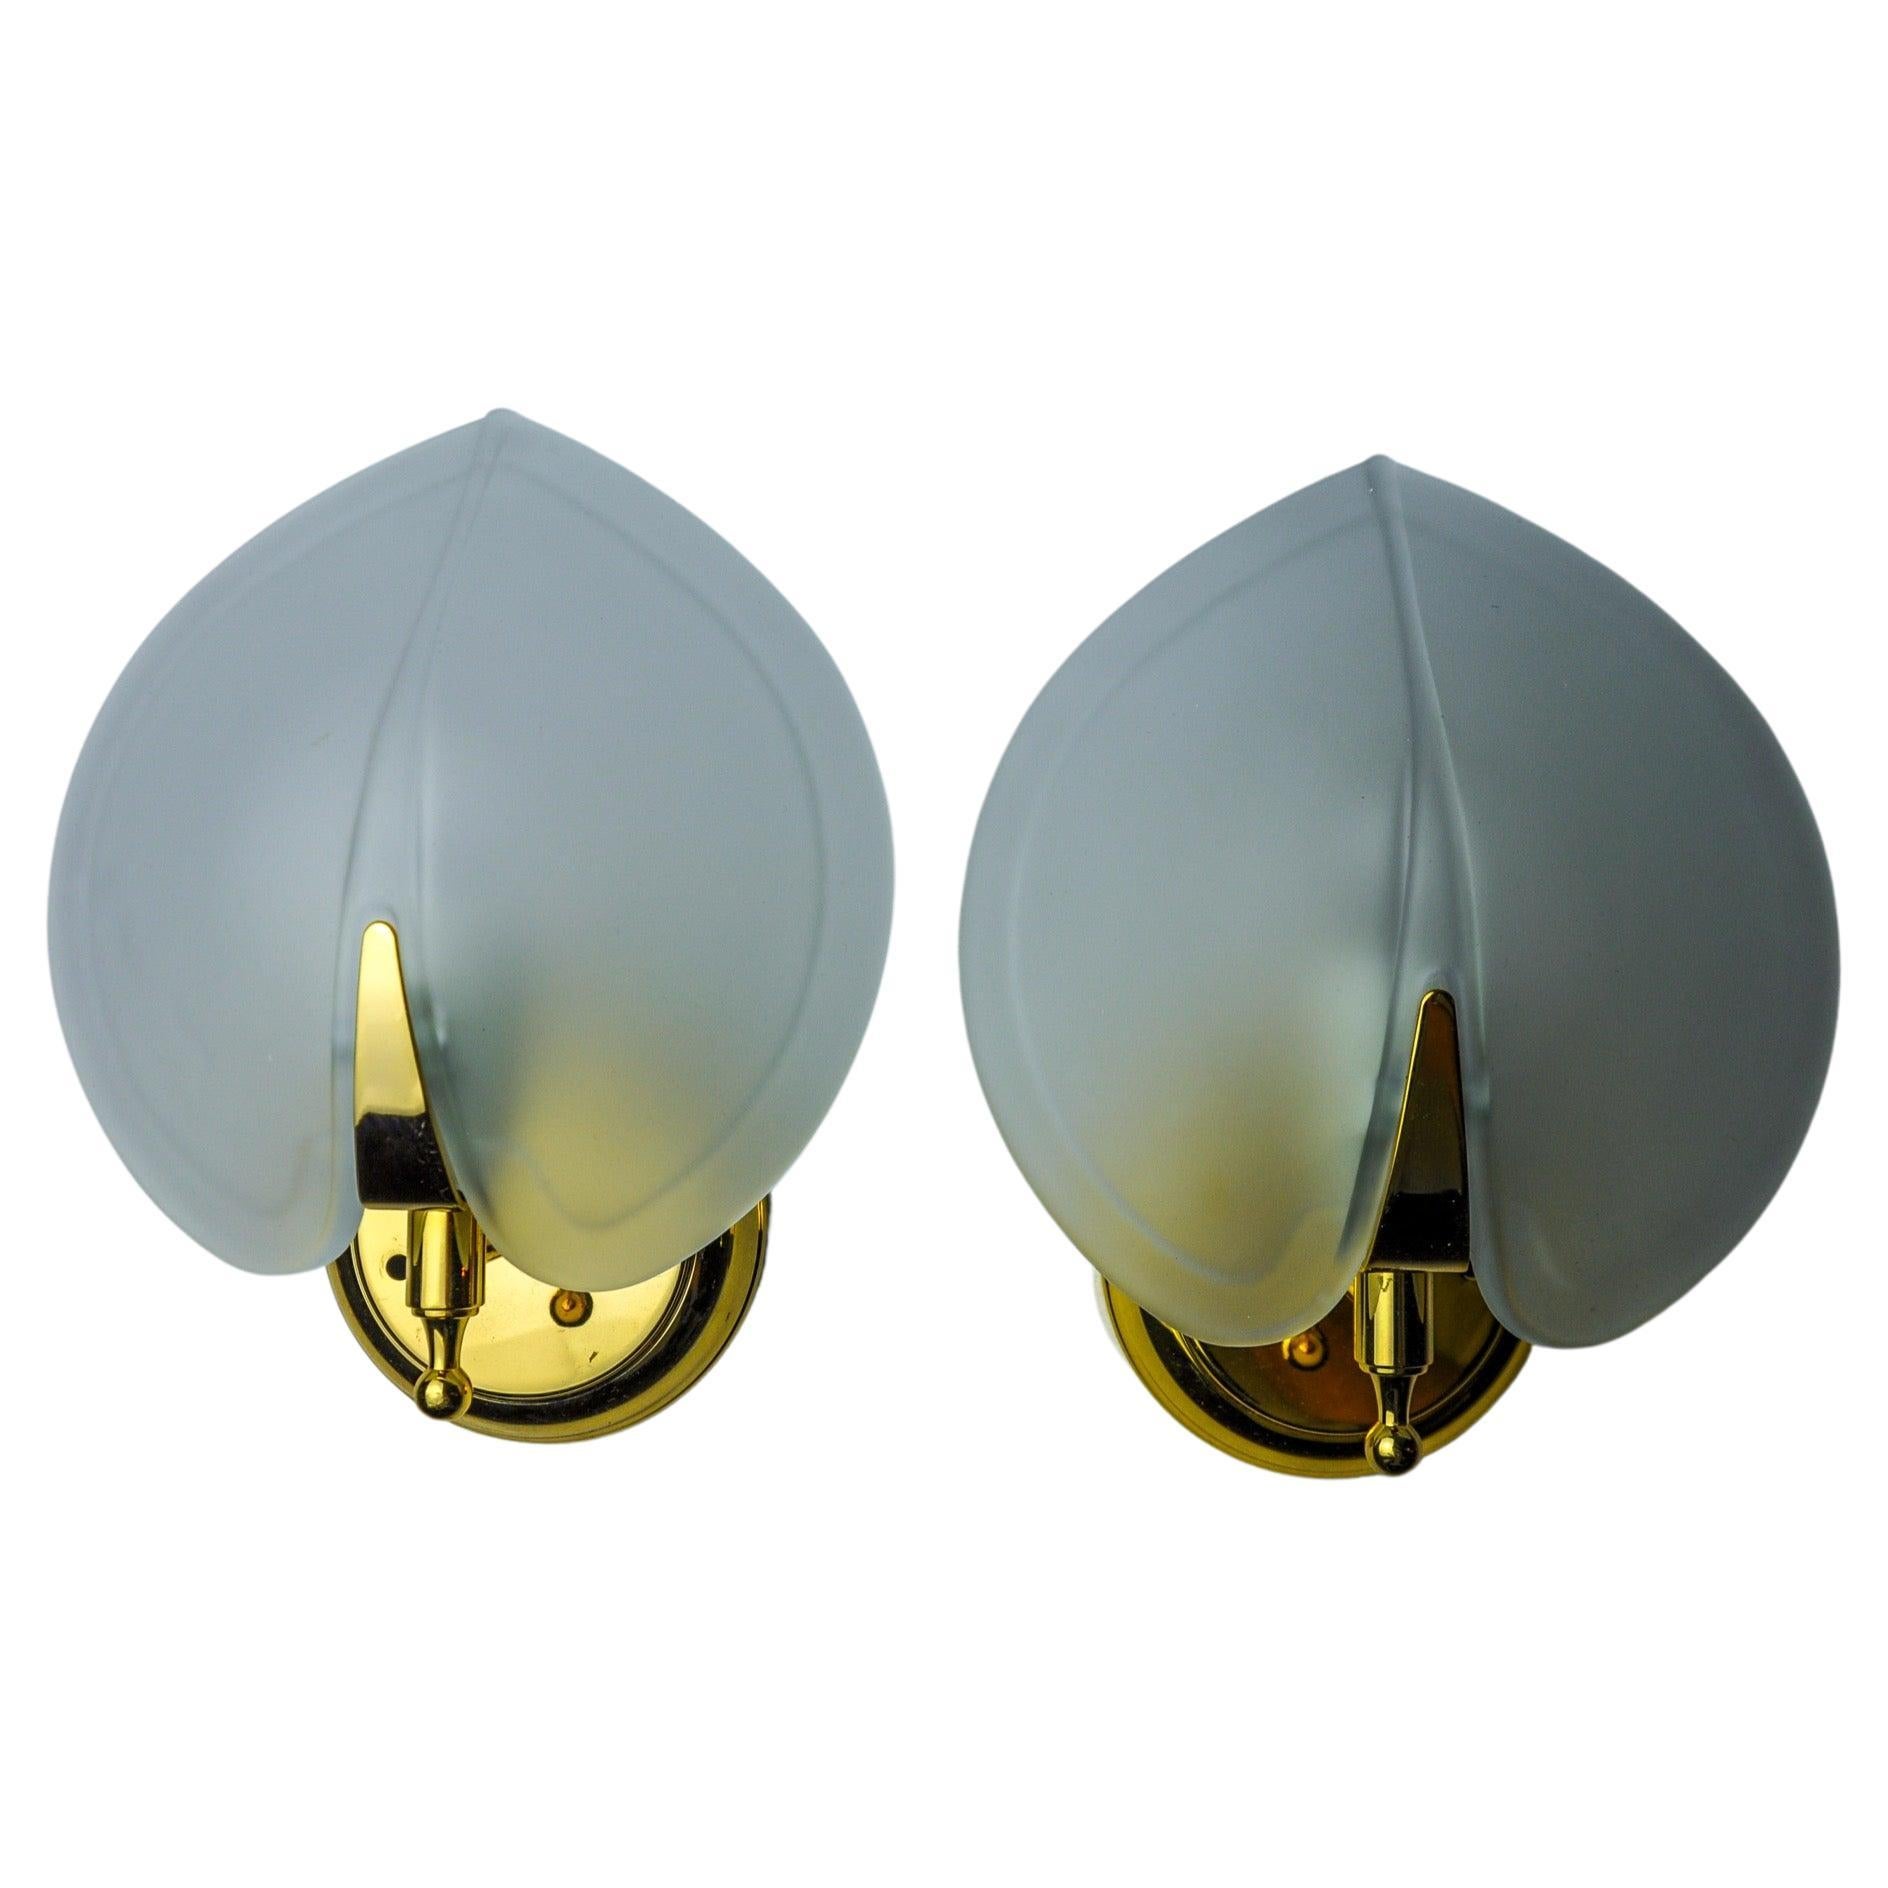 Pair of wall lamps "Leaf" in opaque glass, murano, Italy 1980